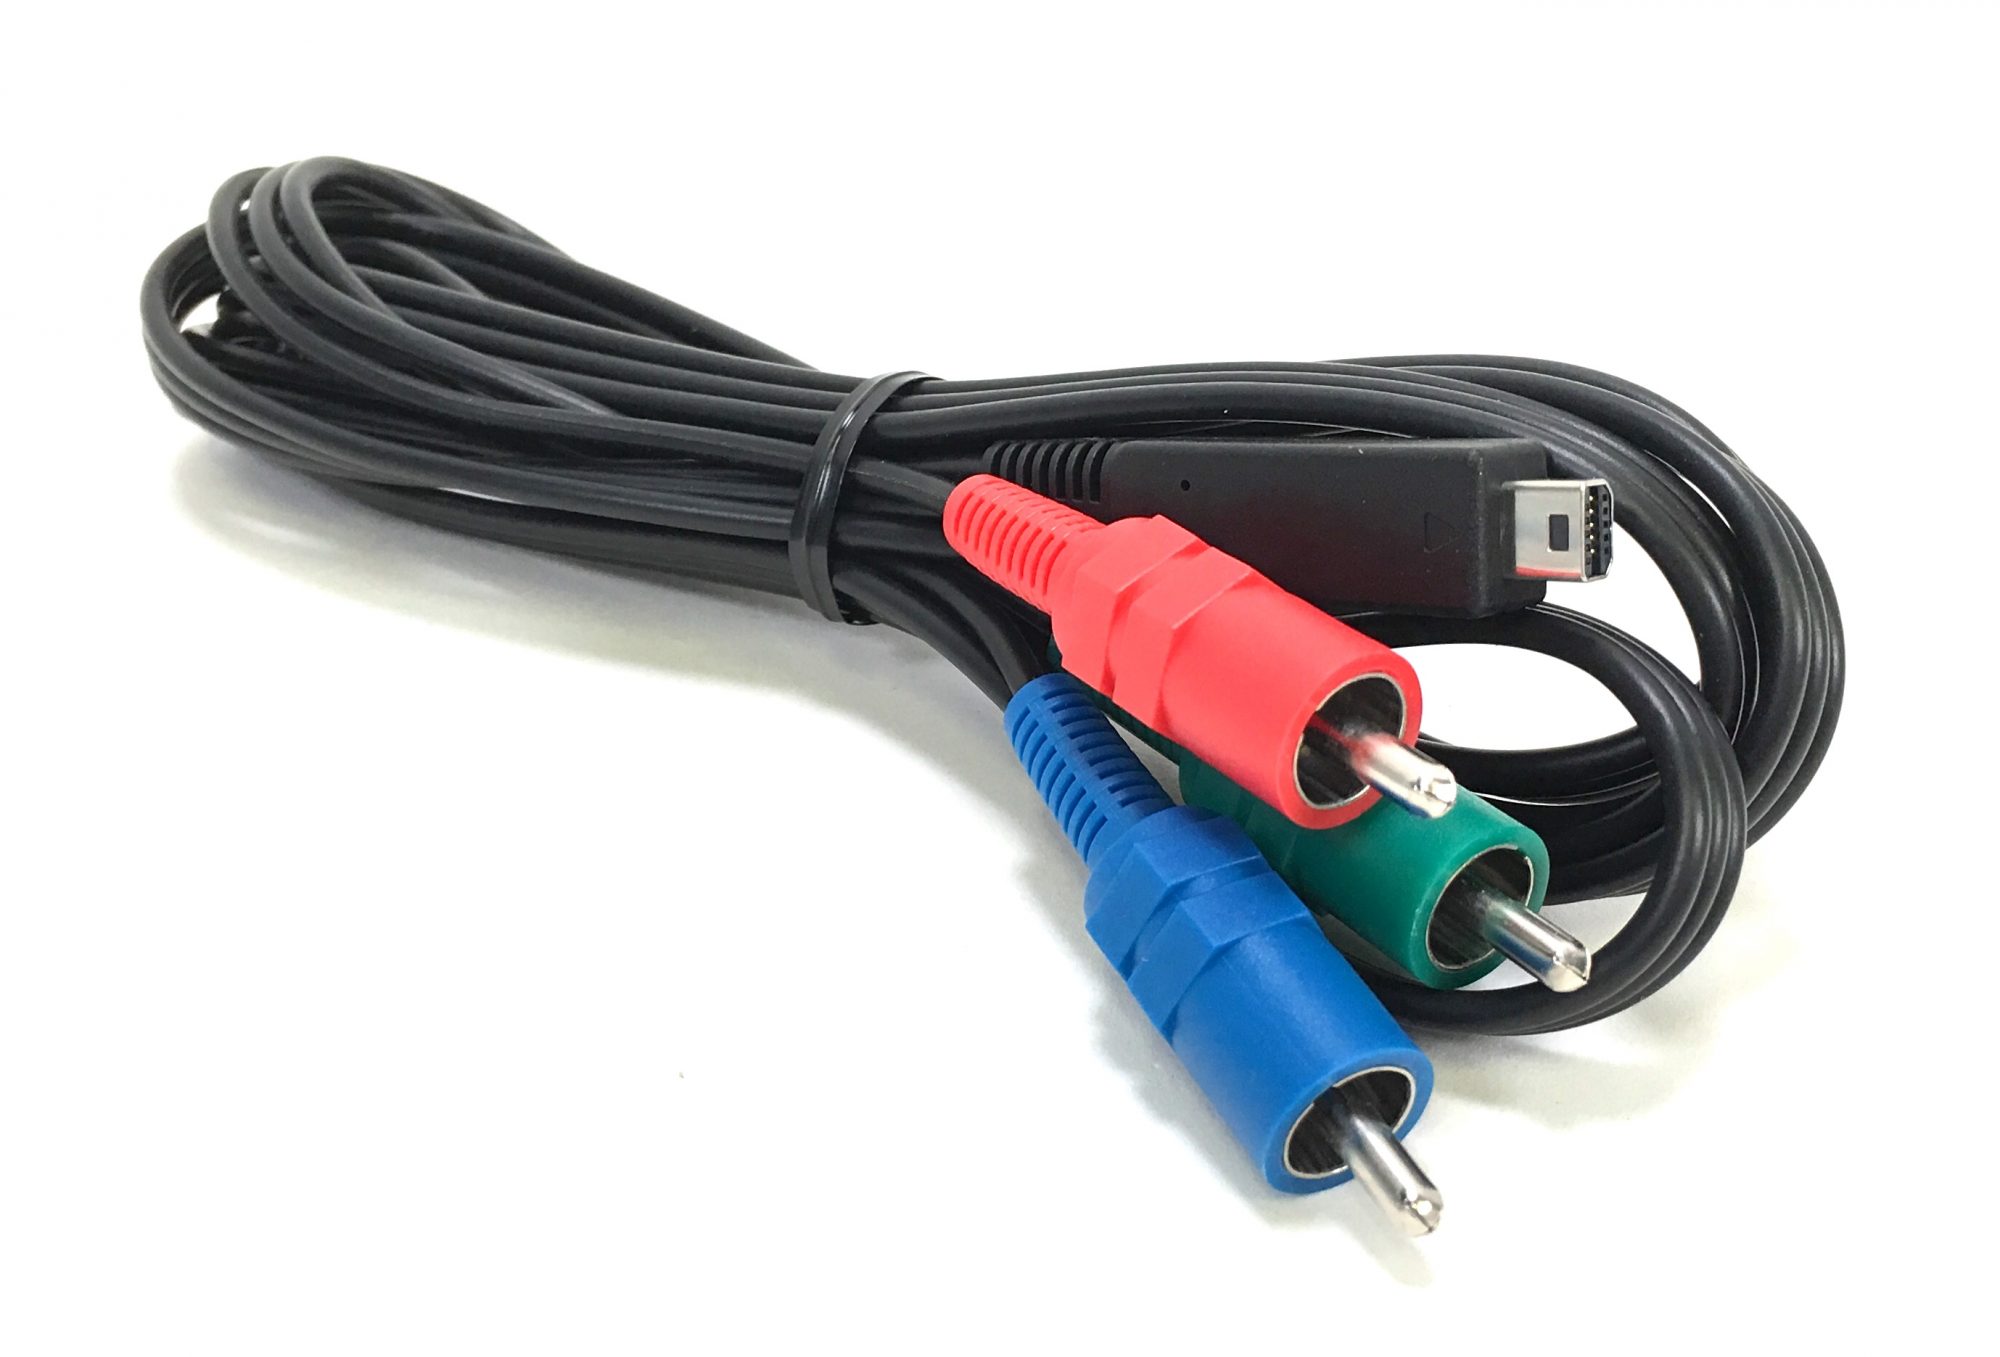 Original Component Video Cable that came with the Sony HDR-AX2000 camcorder. It is a genuine Sony part, sourced directly from Sony USA. Brand new factory fresh. Free Shipping.